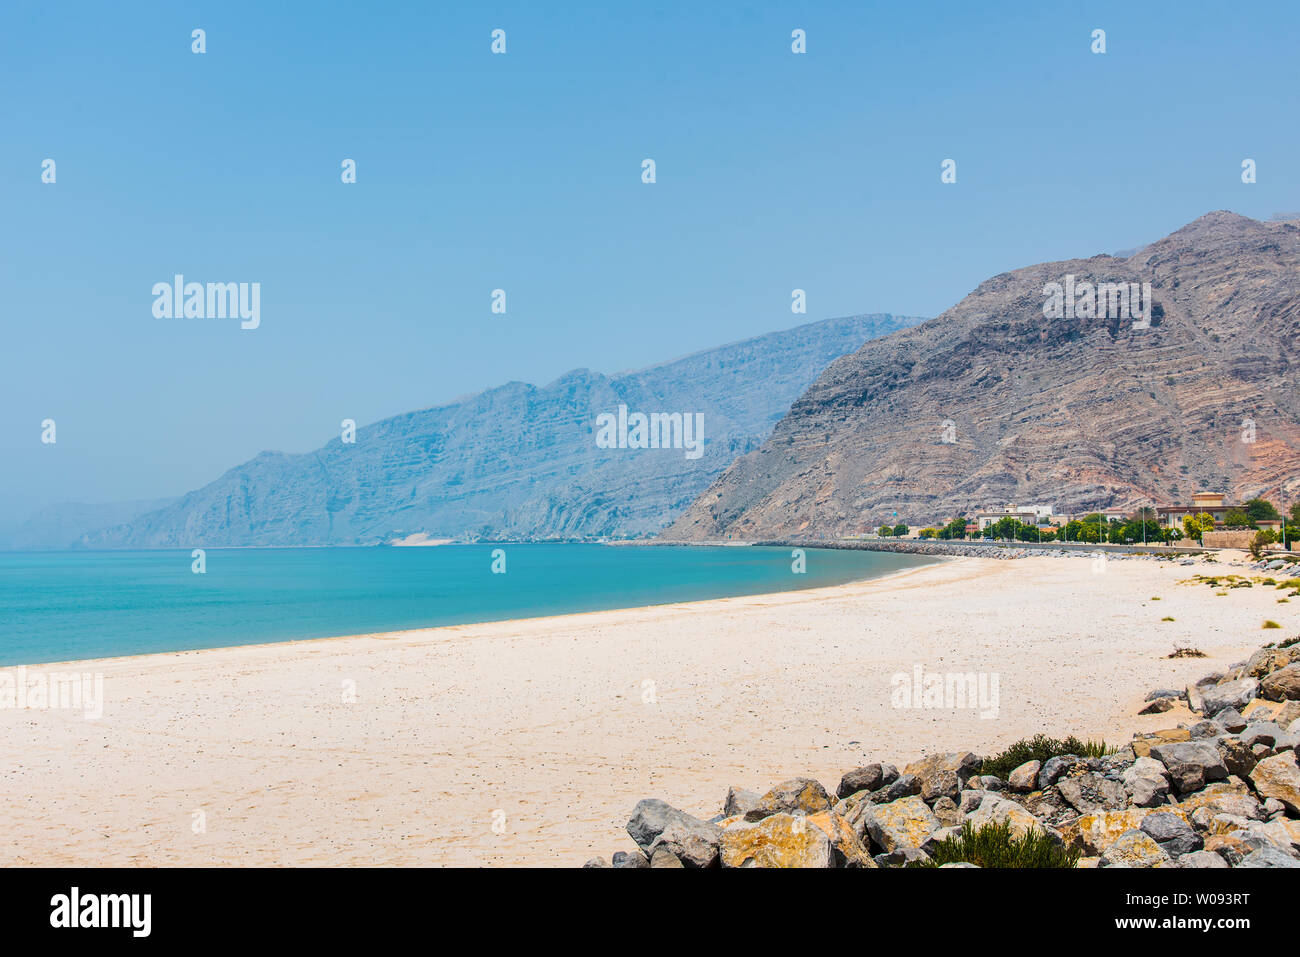 Beautiful beach by the road near Khasab city in Musandam Governorate of Oman Stock Photo